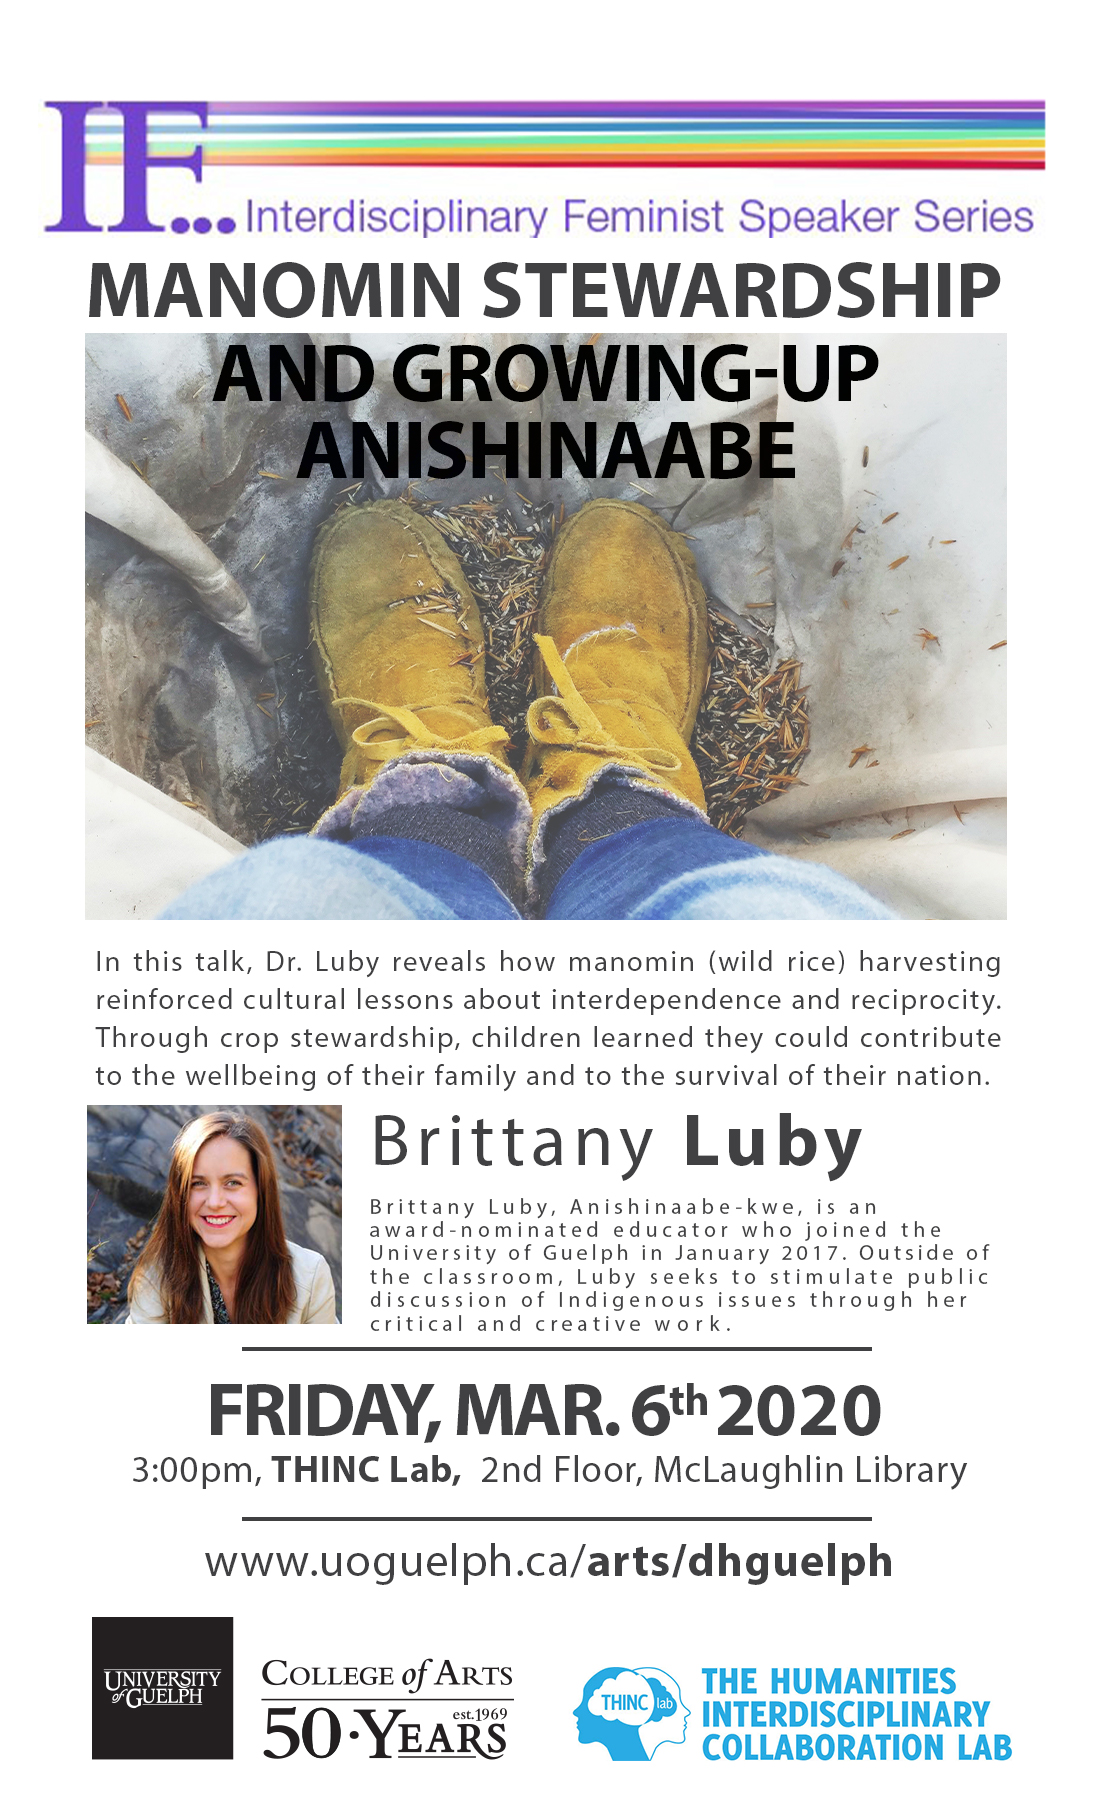 Poster of Brittany Luby's Lecture on March 6, 2020.